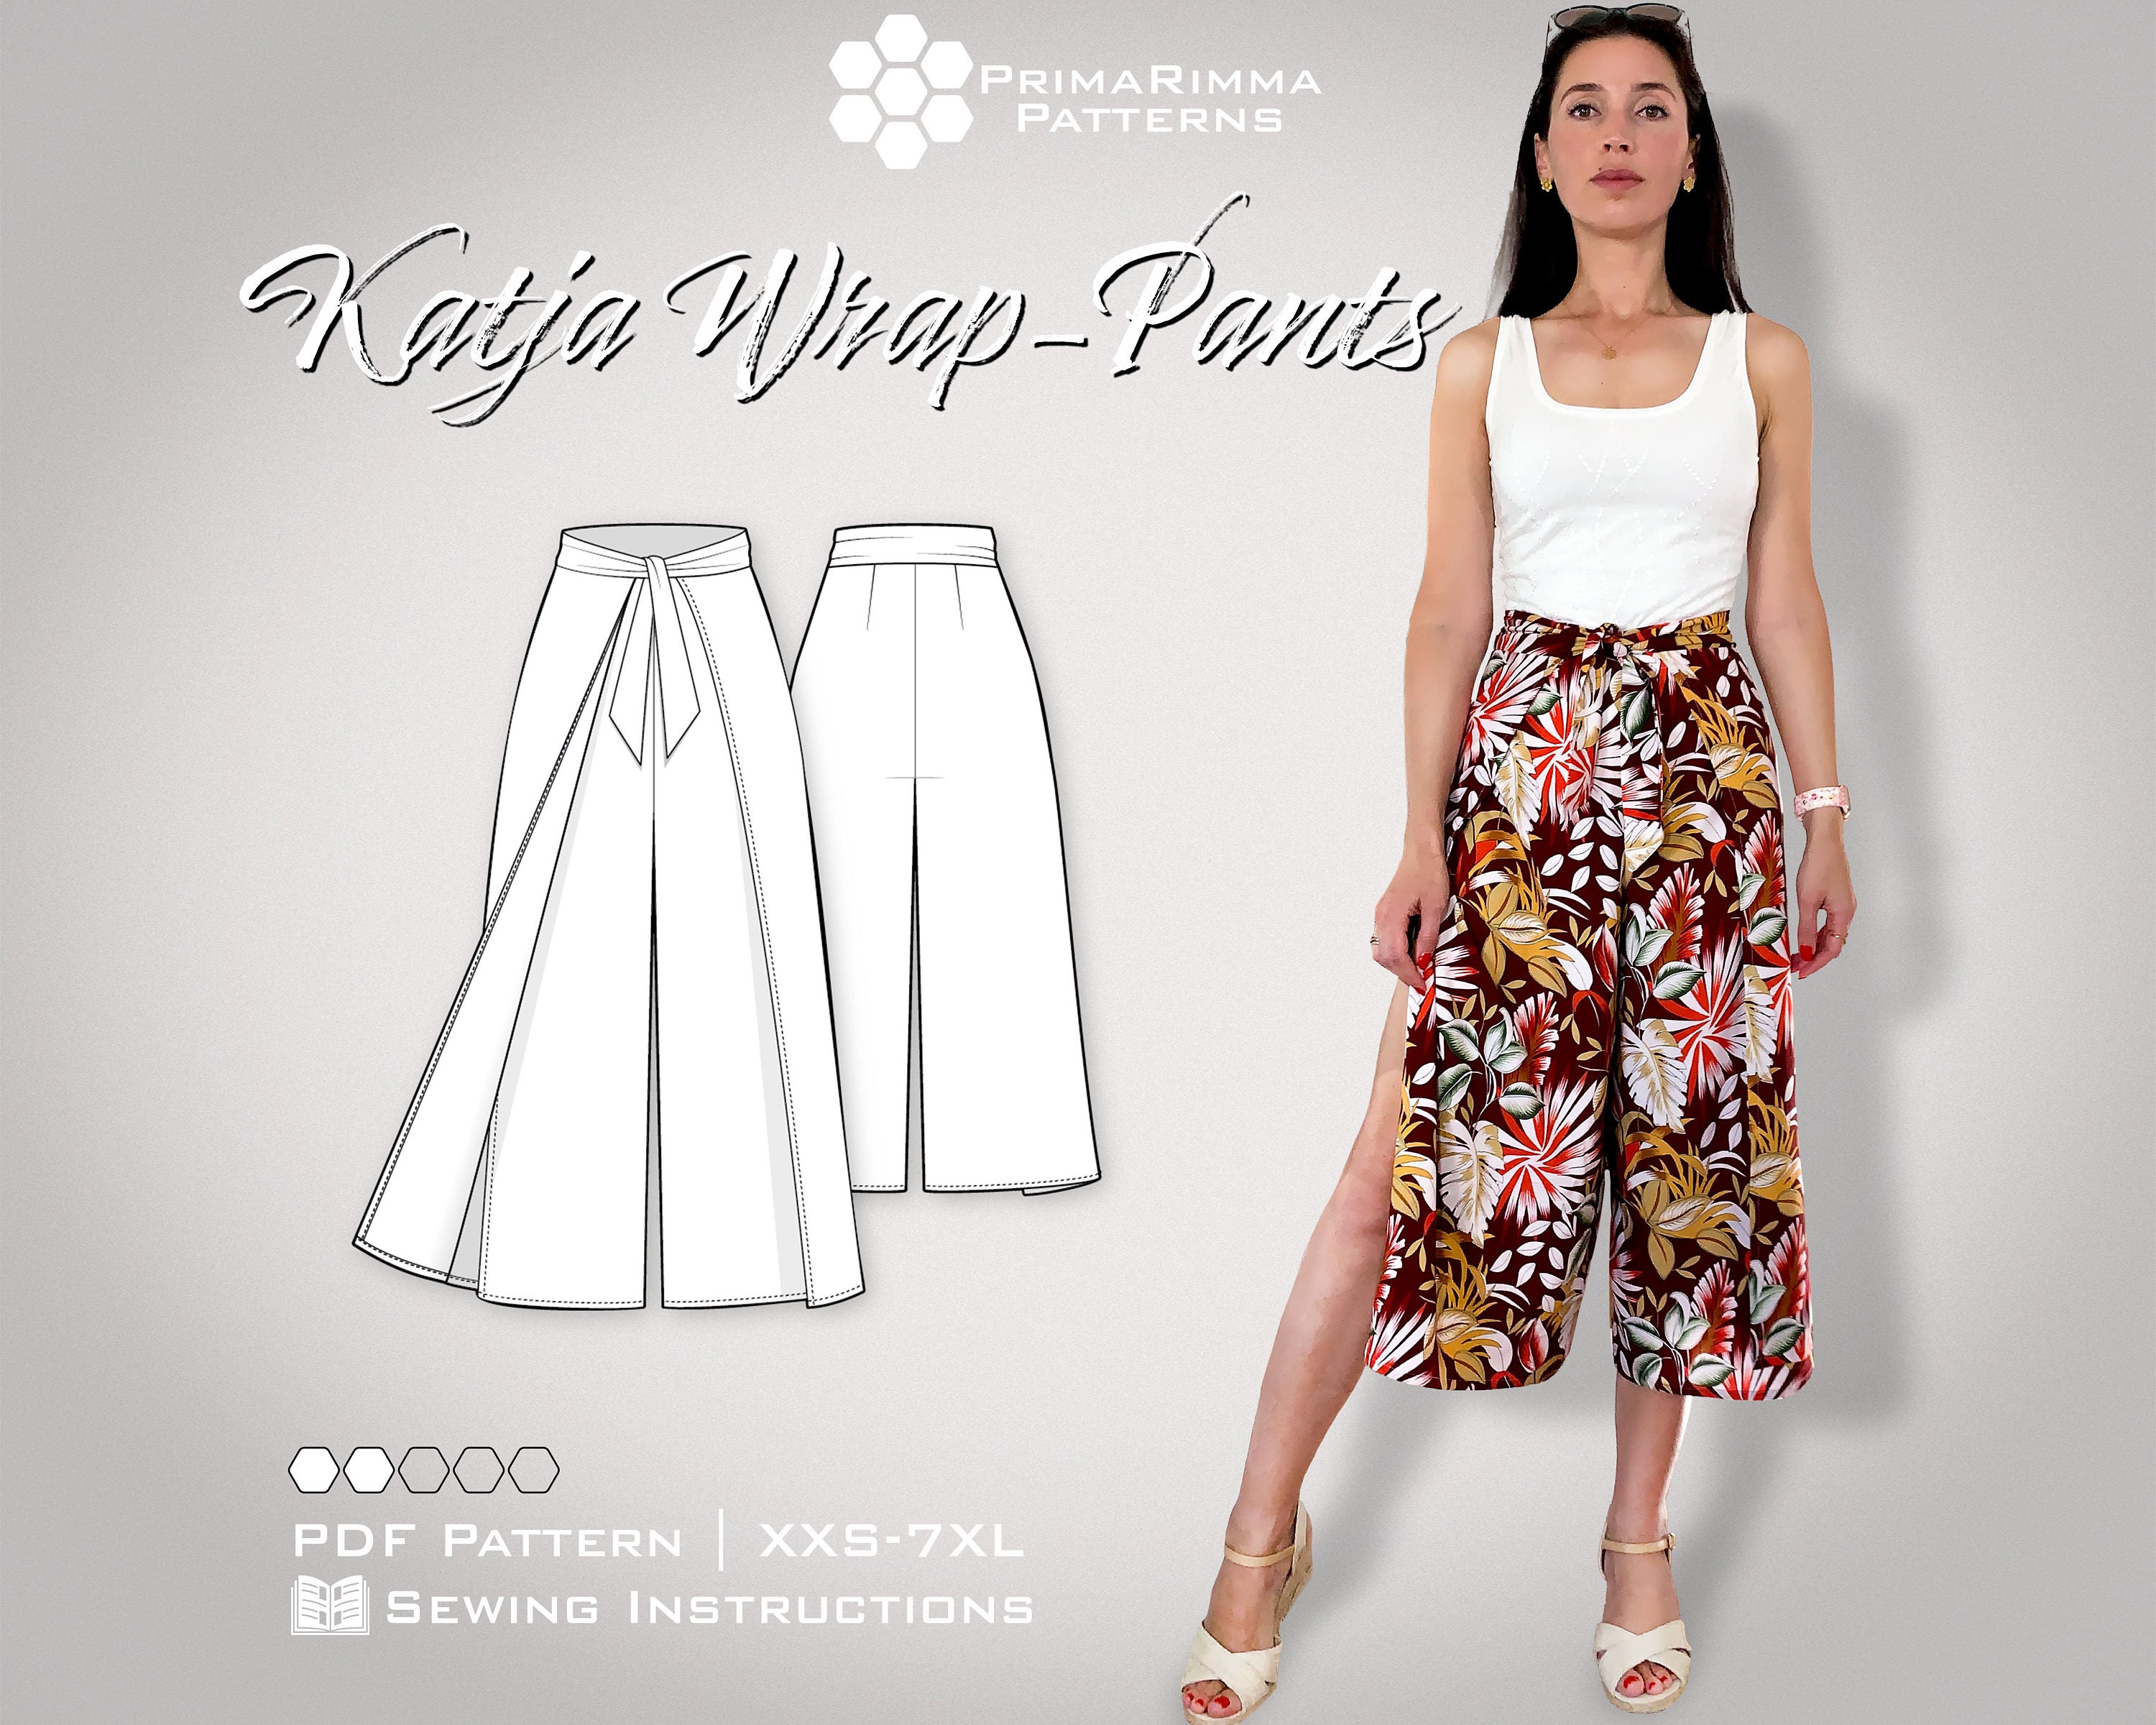 Solid Color Wrap Pants, Lightweight and Flowy Wrap Around Pants